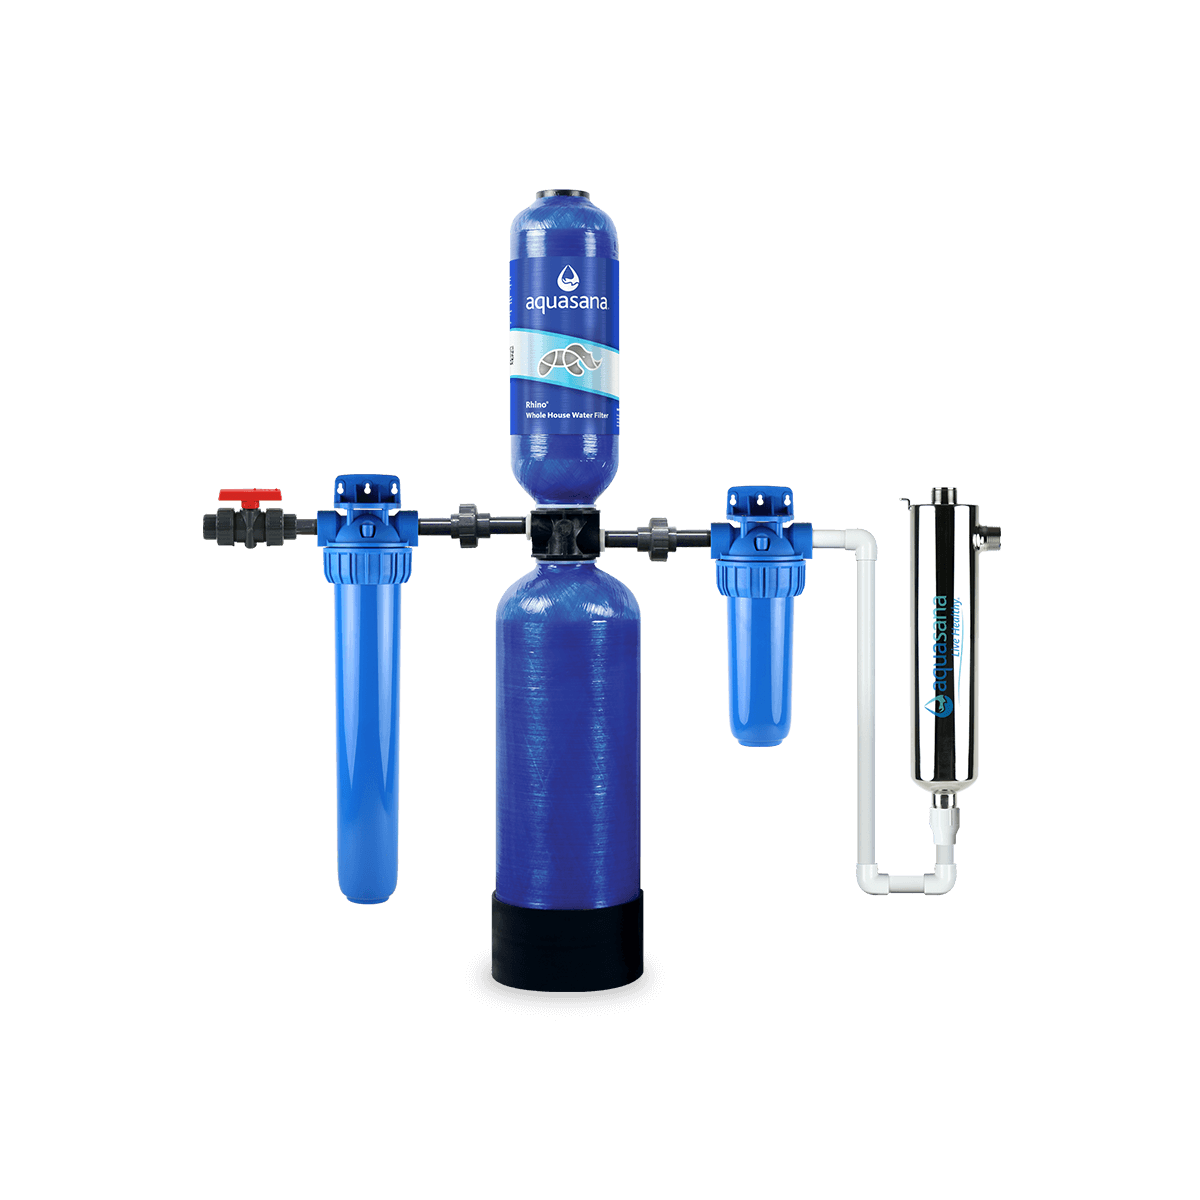 Rhino Whole House Water Filter System For Home With UV Filter, 10 Year 1,000,000 Gallon Removes 99% of Bacteria & Viruses Aquasana